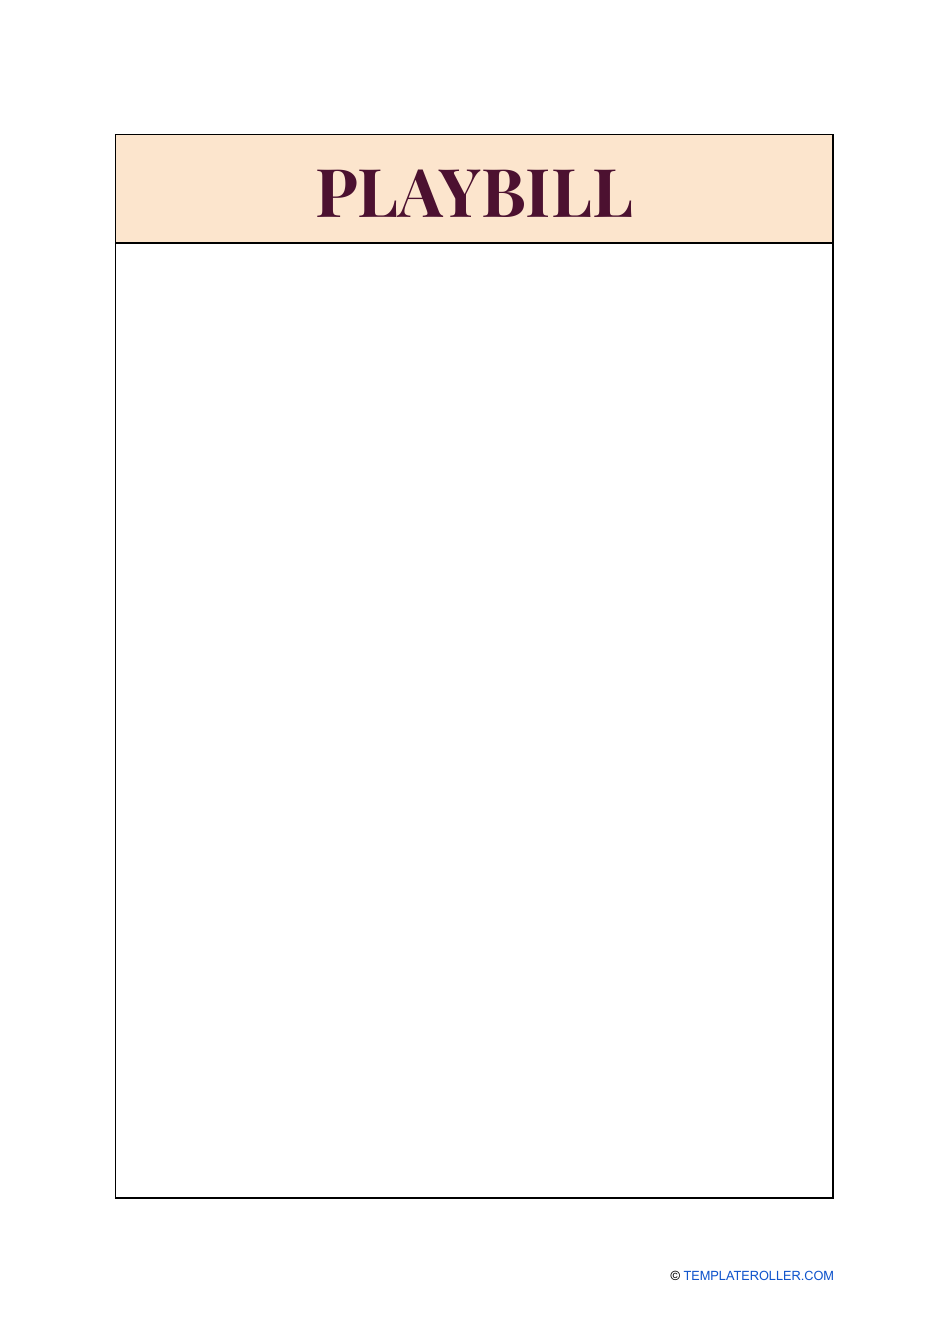 playbill template free download